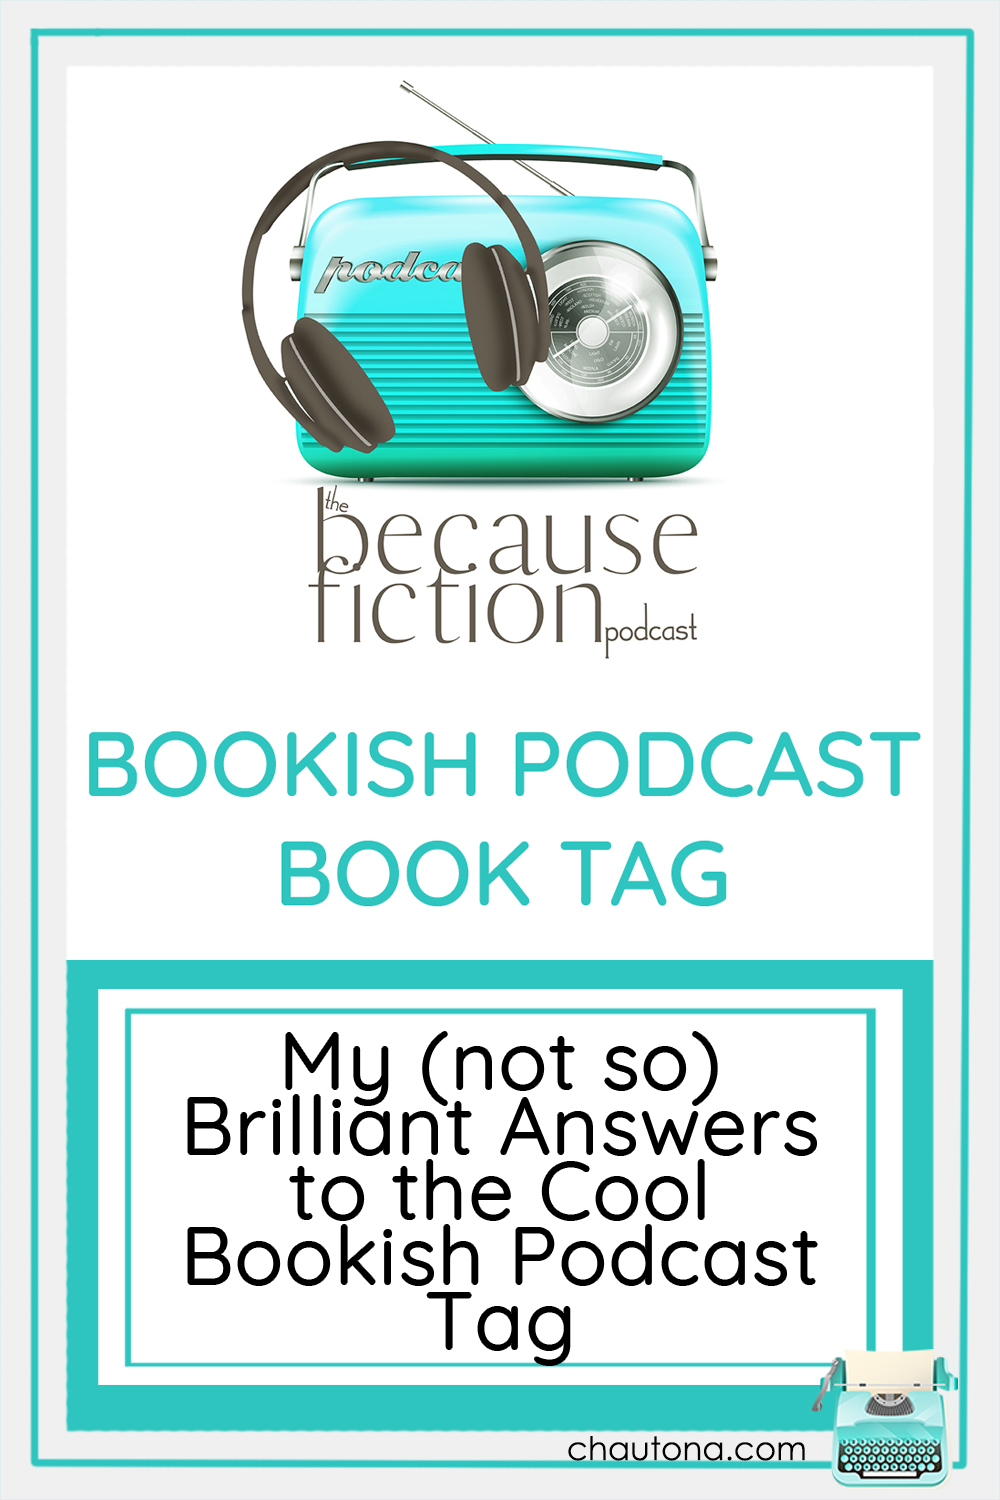 Nicole and the Undending TBR over on Instagram tagged me in the Bookish Podcast Tag and I went for it. Here are my not-so-Brilliant replies! via @chautonahavig